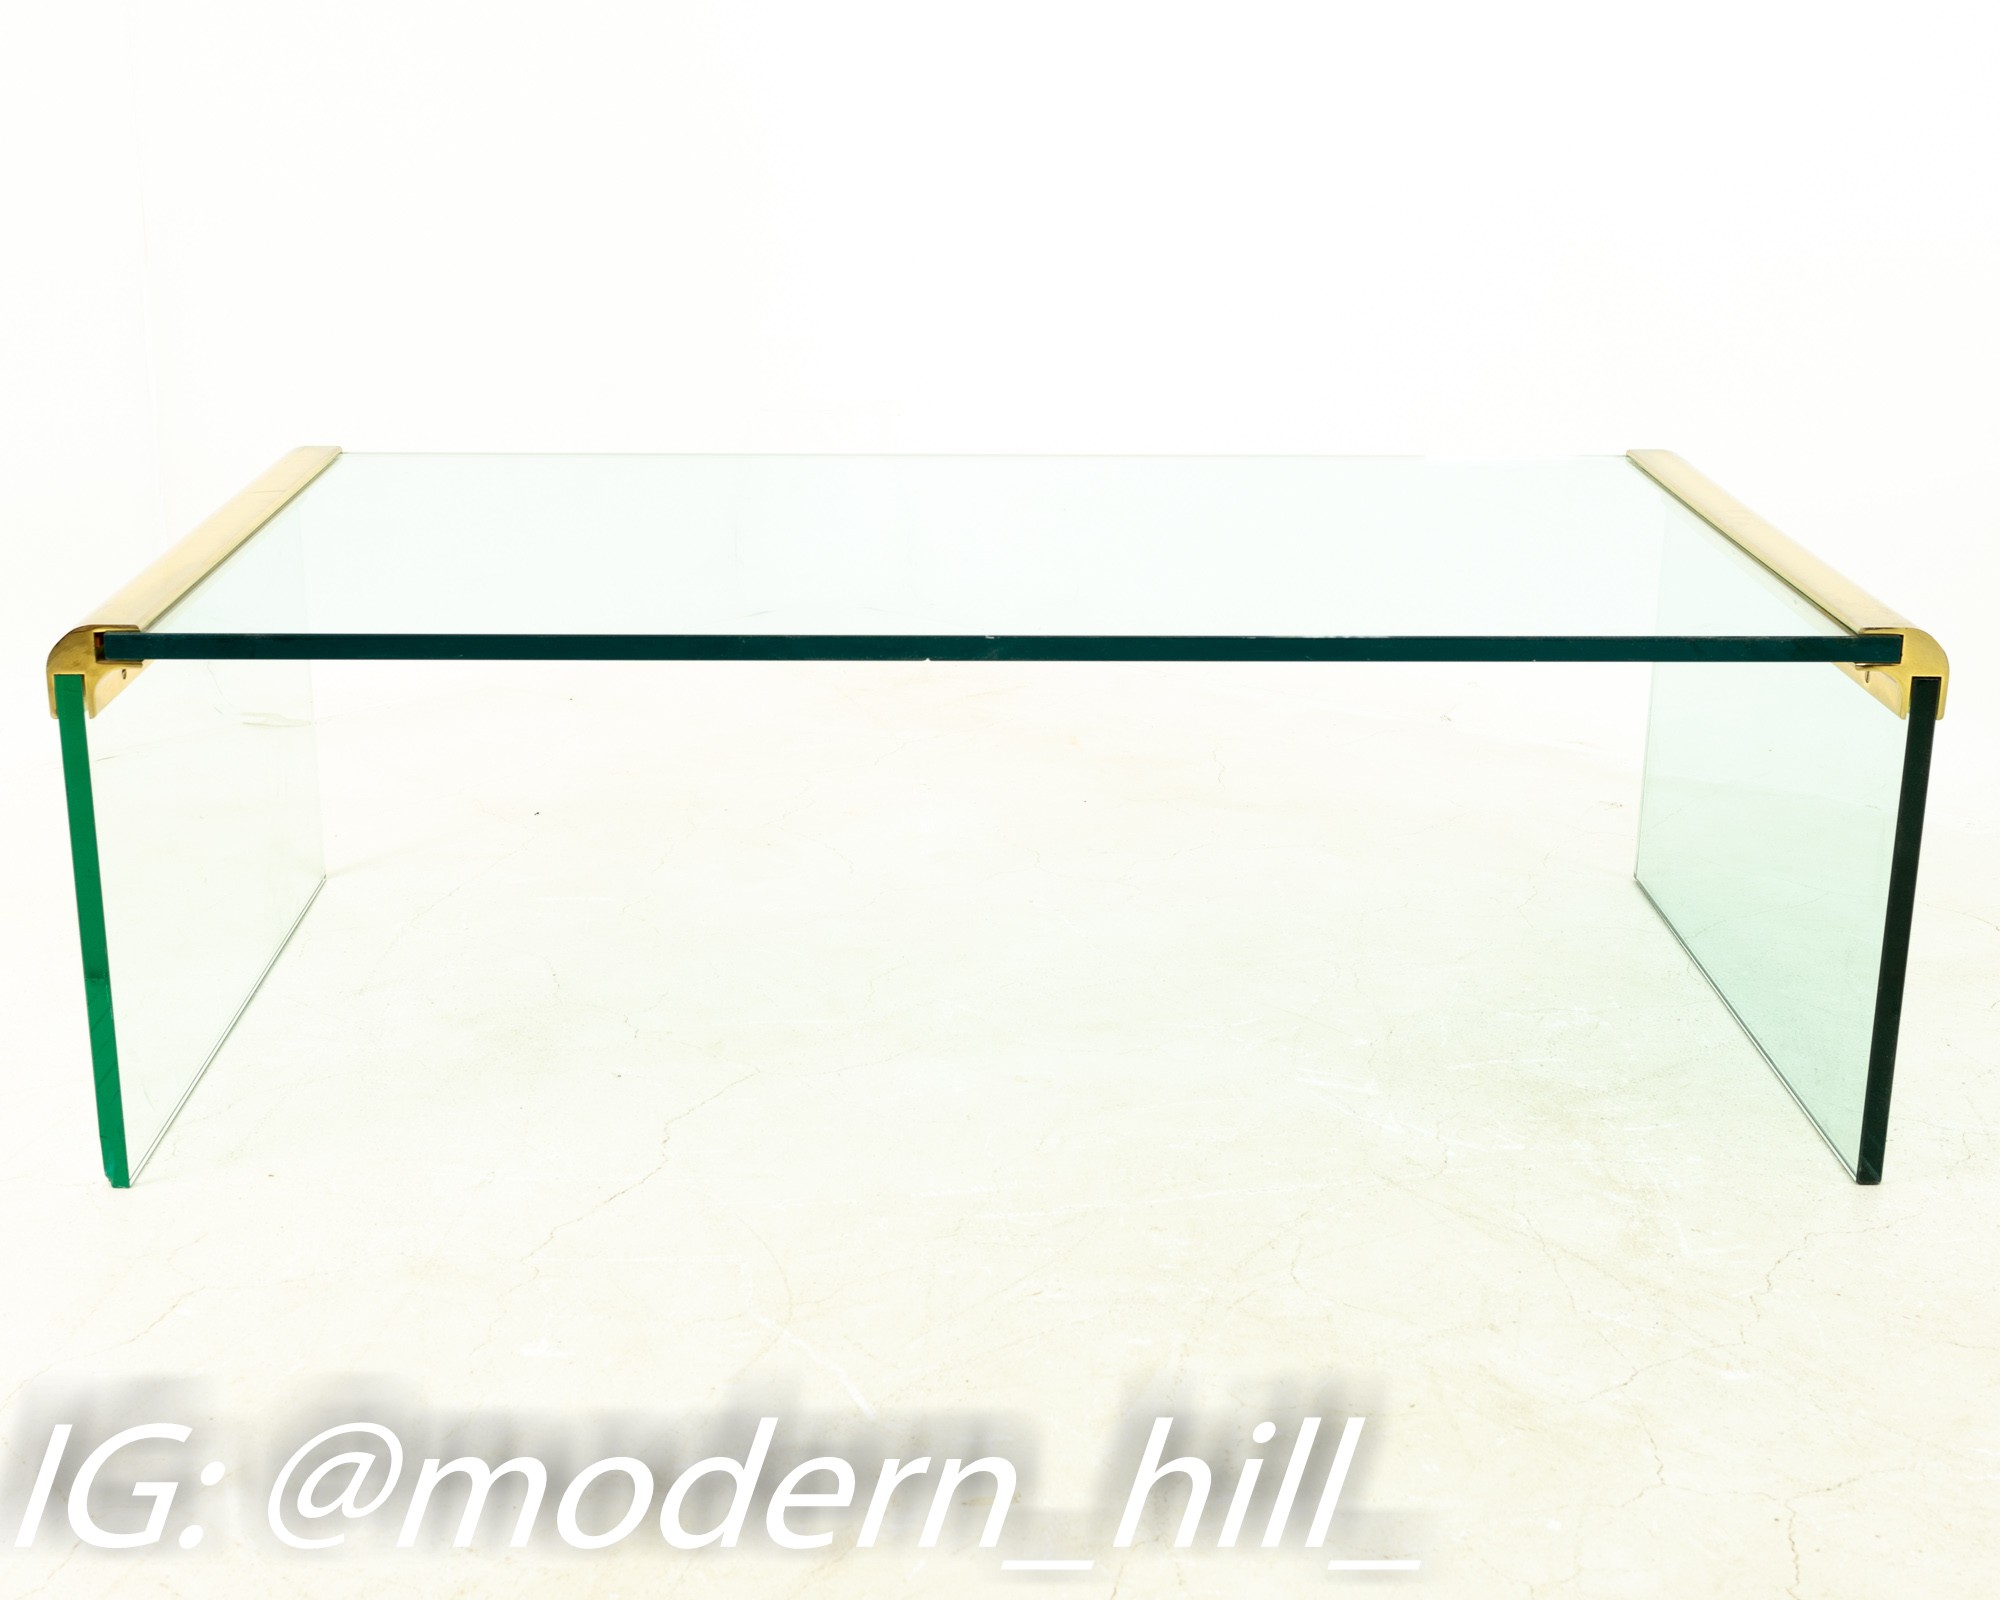 Leon Rosen for Pace Mid Century Brass and Glass Coffee Table